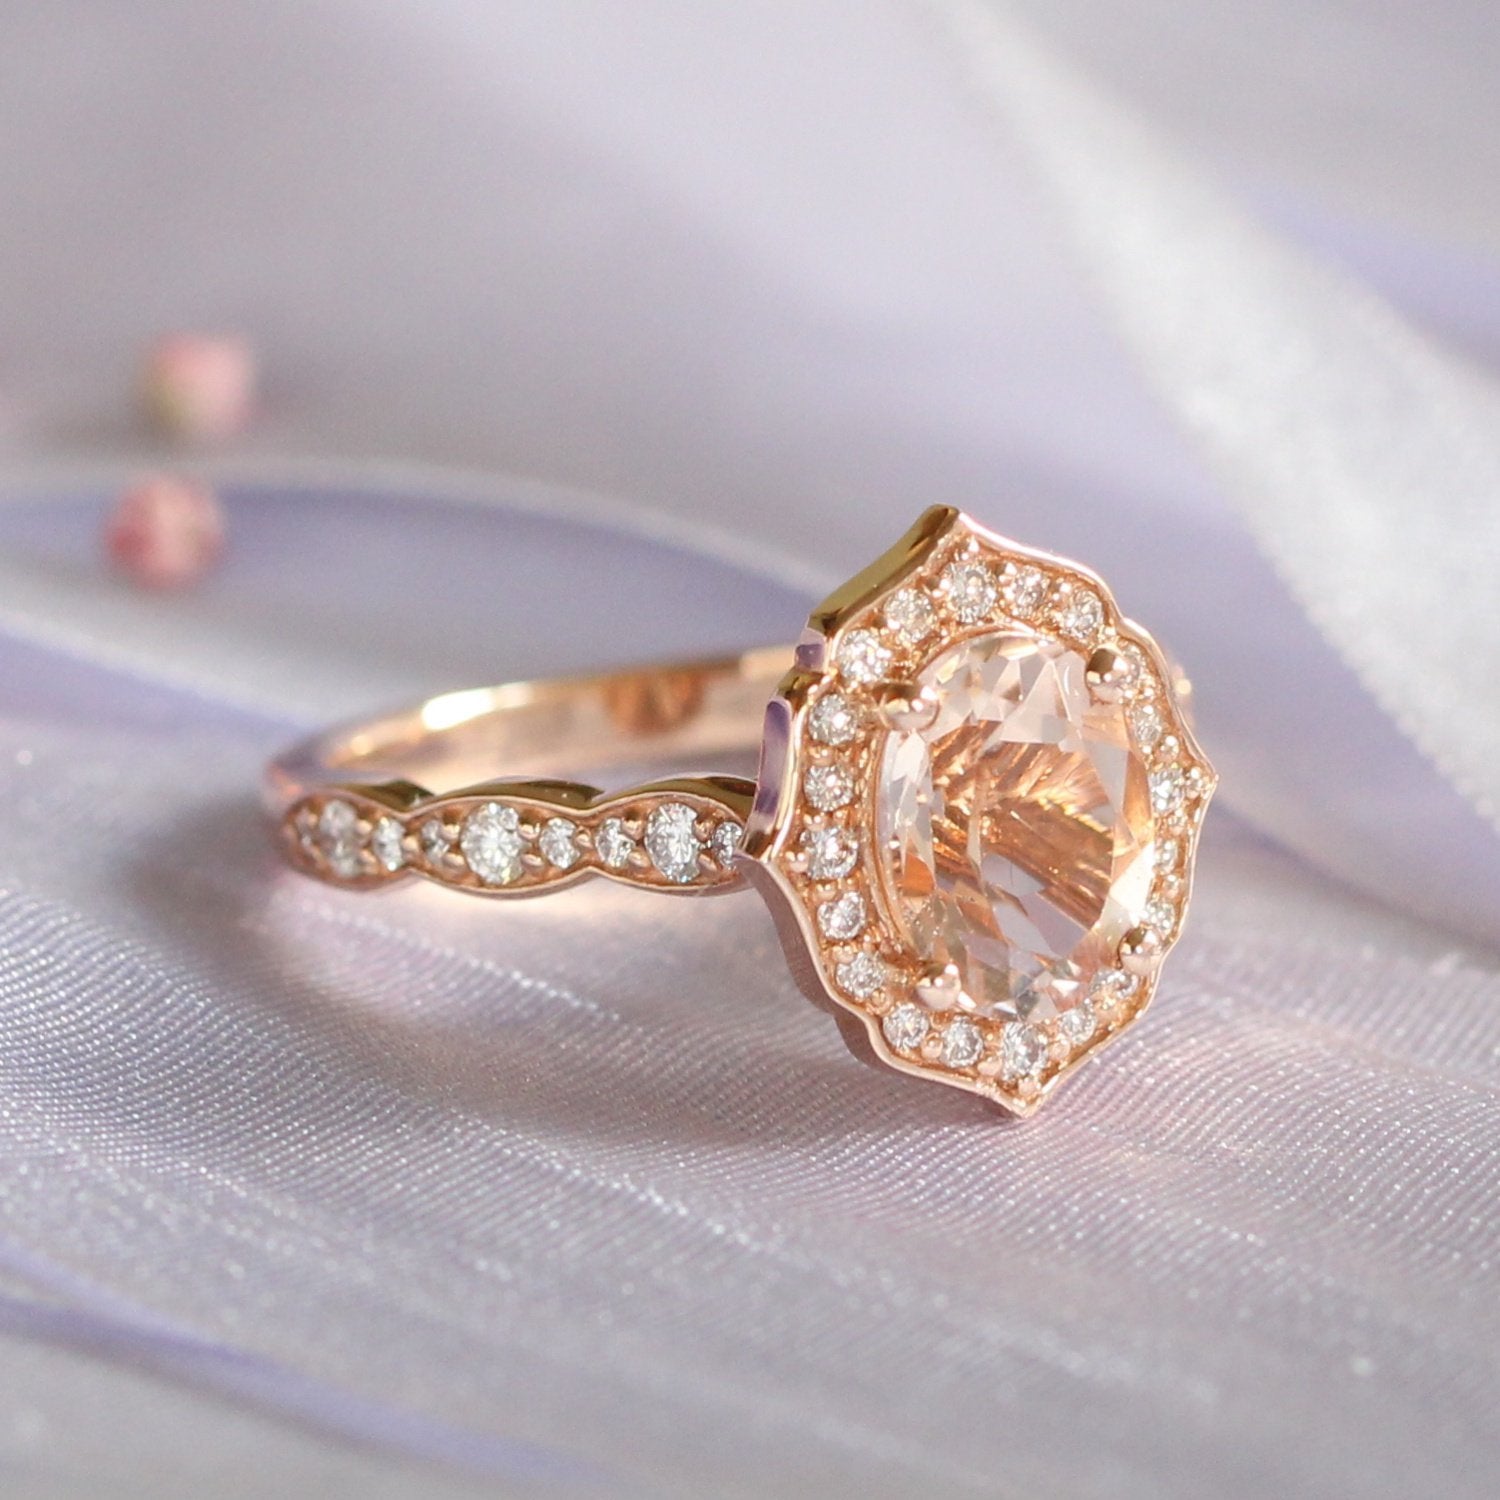 rose gold morganite ring oval engagement ring diamond scalloped band by la more designoval morganite engagement ring rose gold vintage halo diamond ring la more design jewelry 